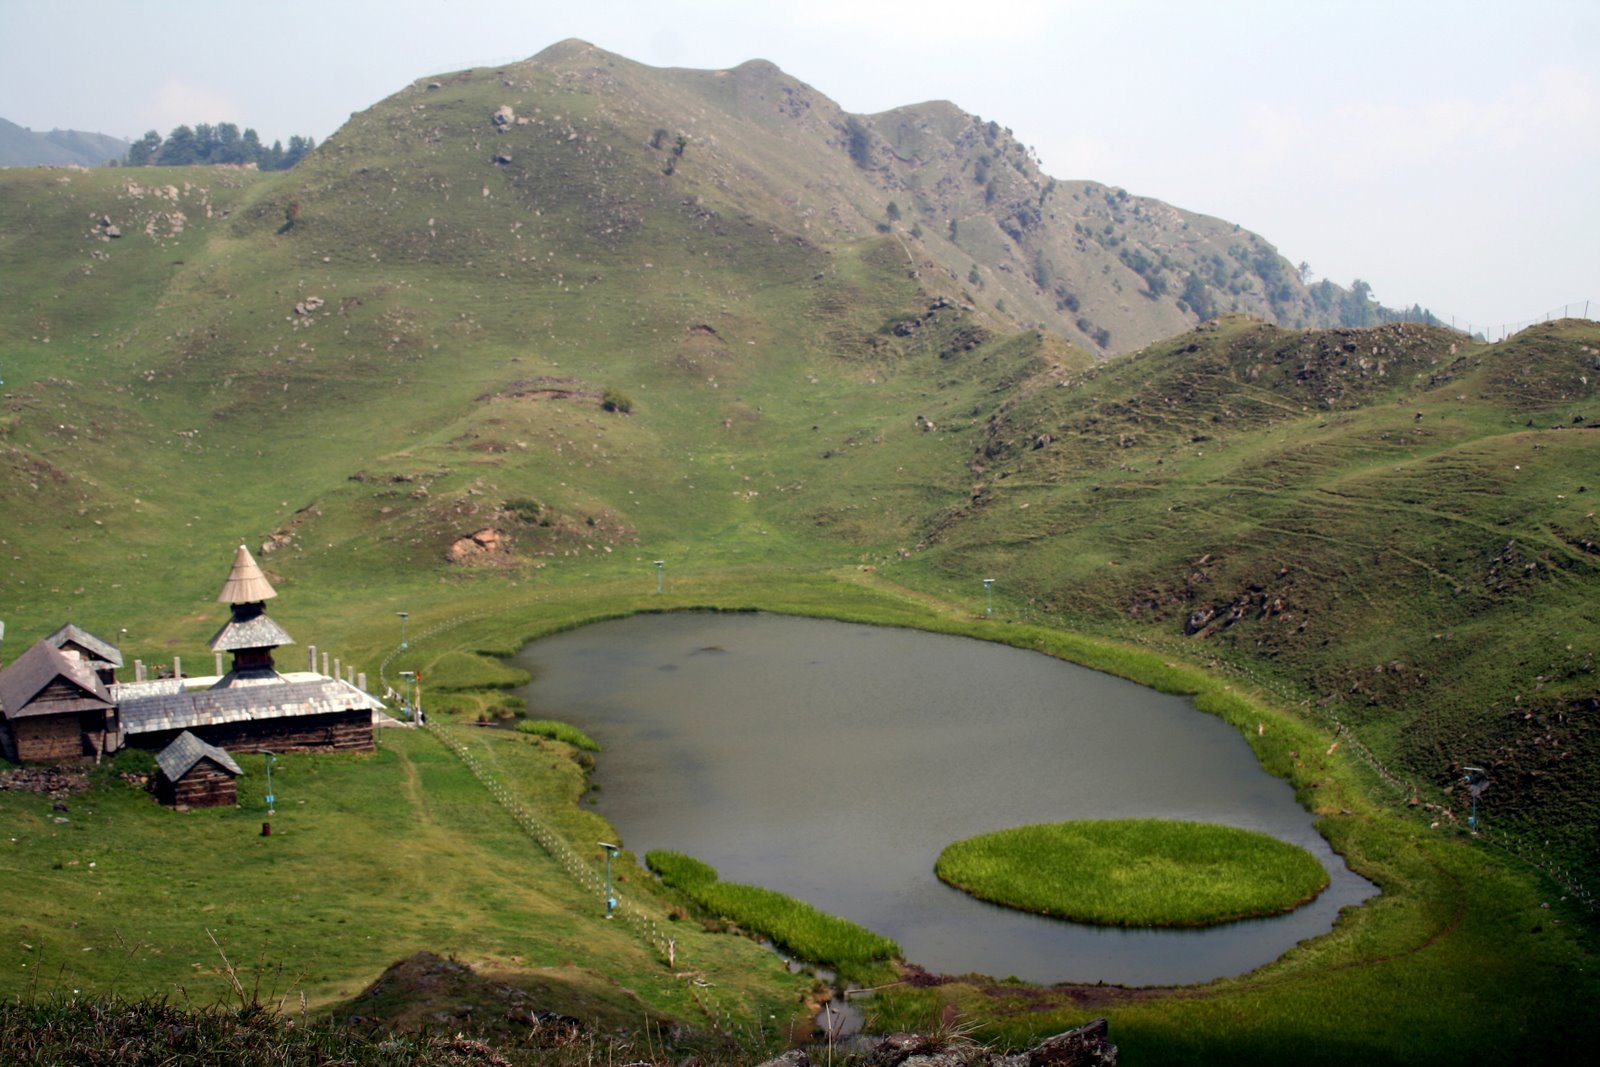 Top 5 Hill stations in India | Insight India : A Travel Guide to India